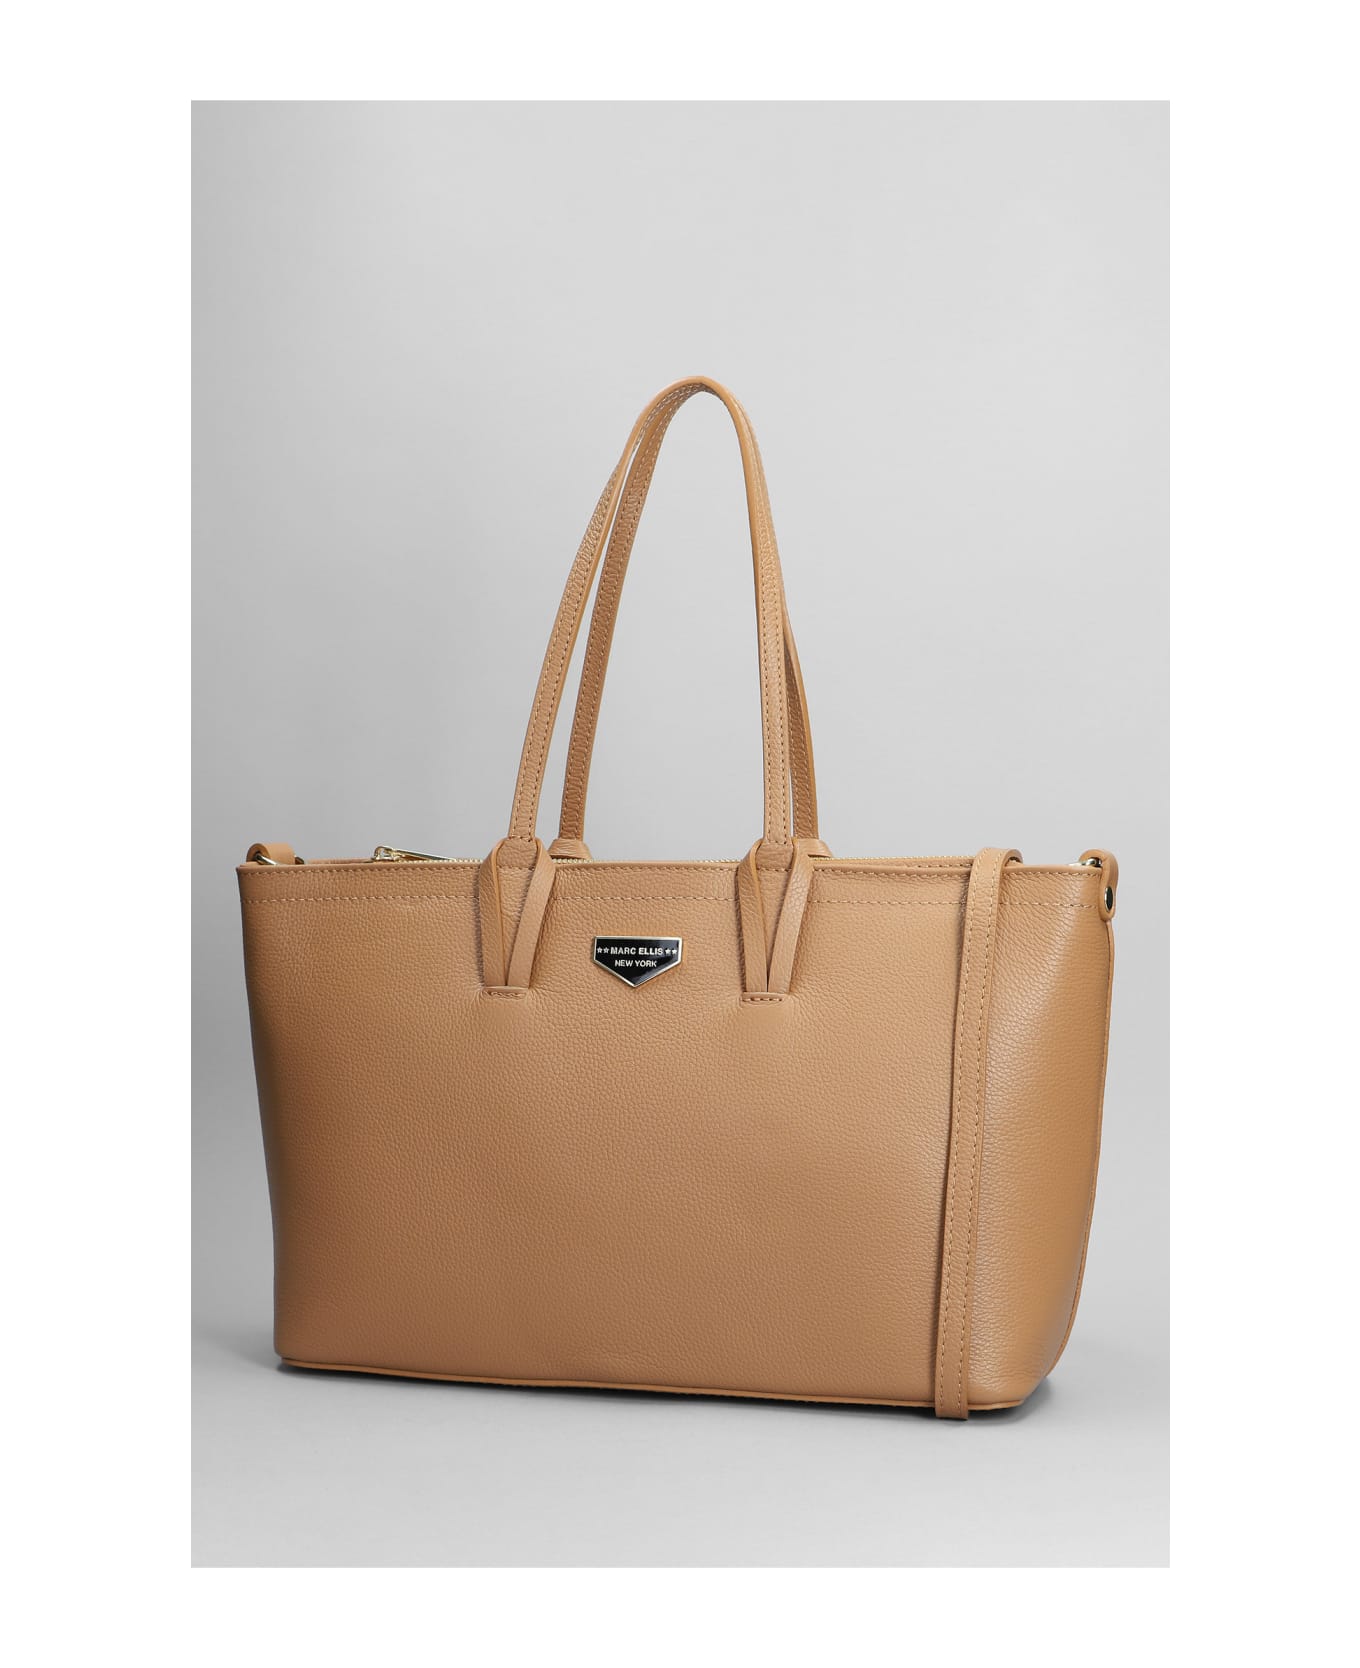 Marc Ellis Marlee Do Tote In Leather Color Leather - leather color トートバッグ